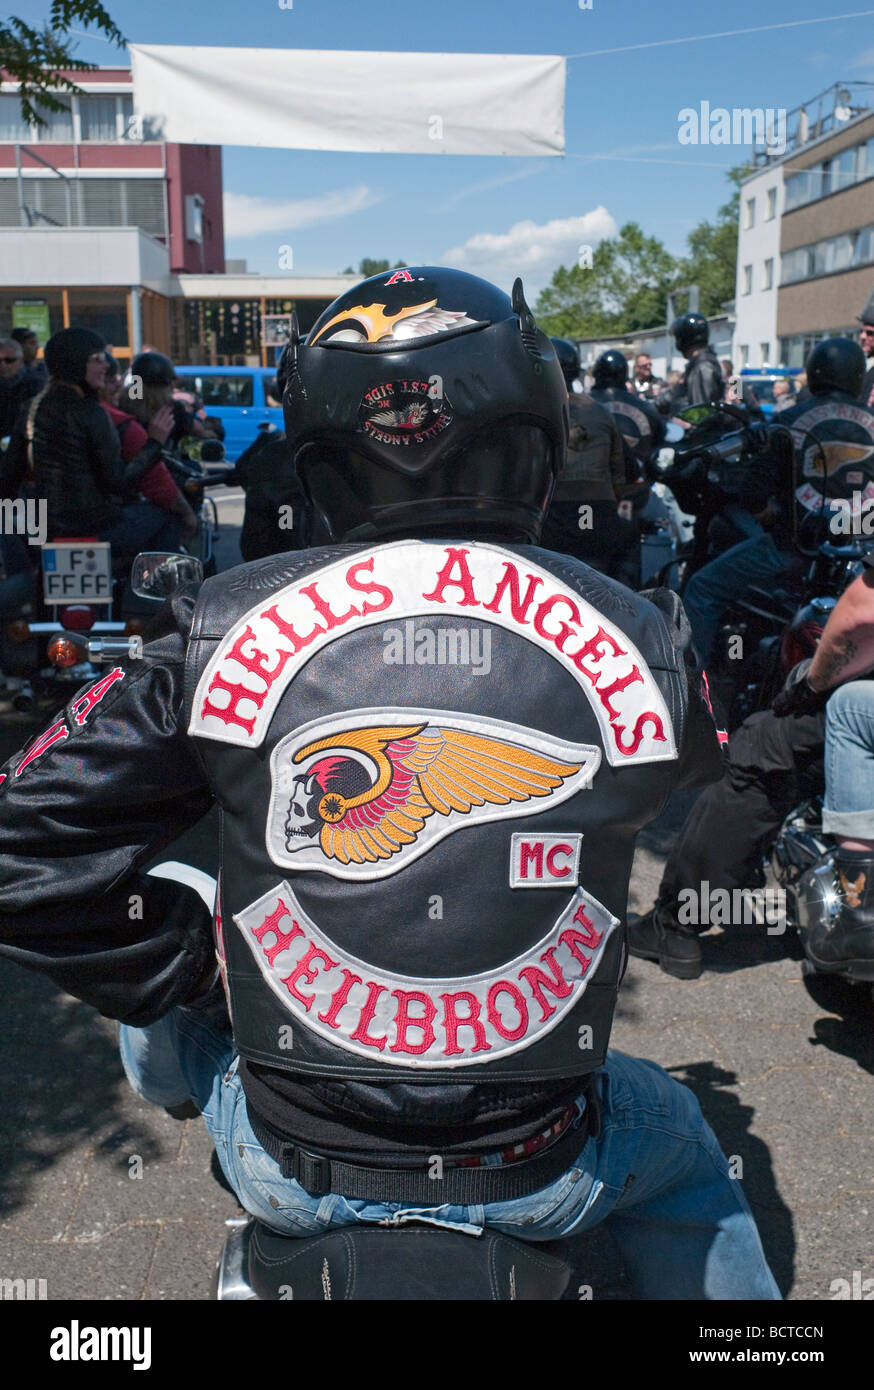 A member of the Hells Angels motorcycle club Stock Photo